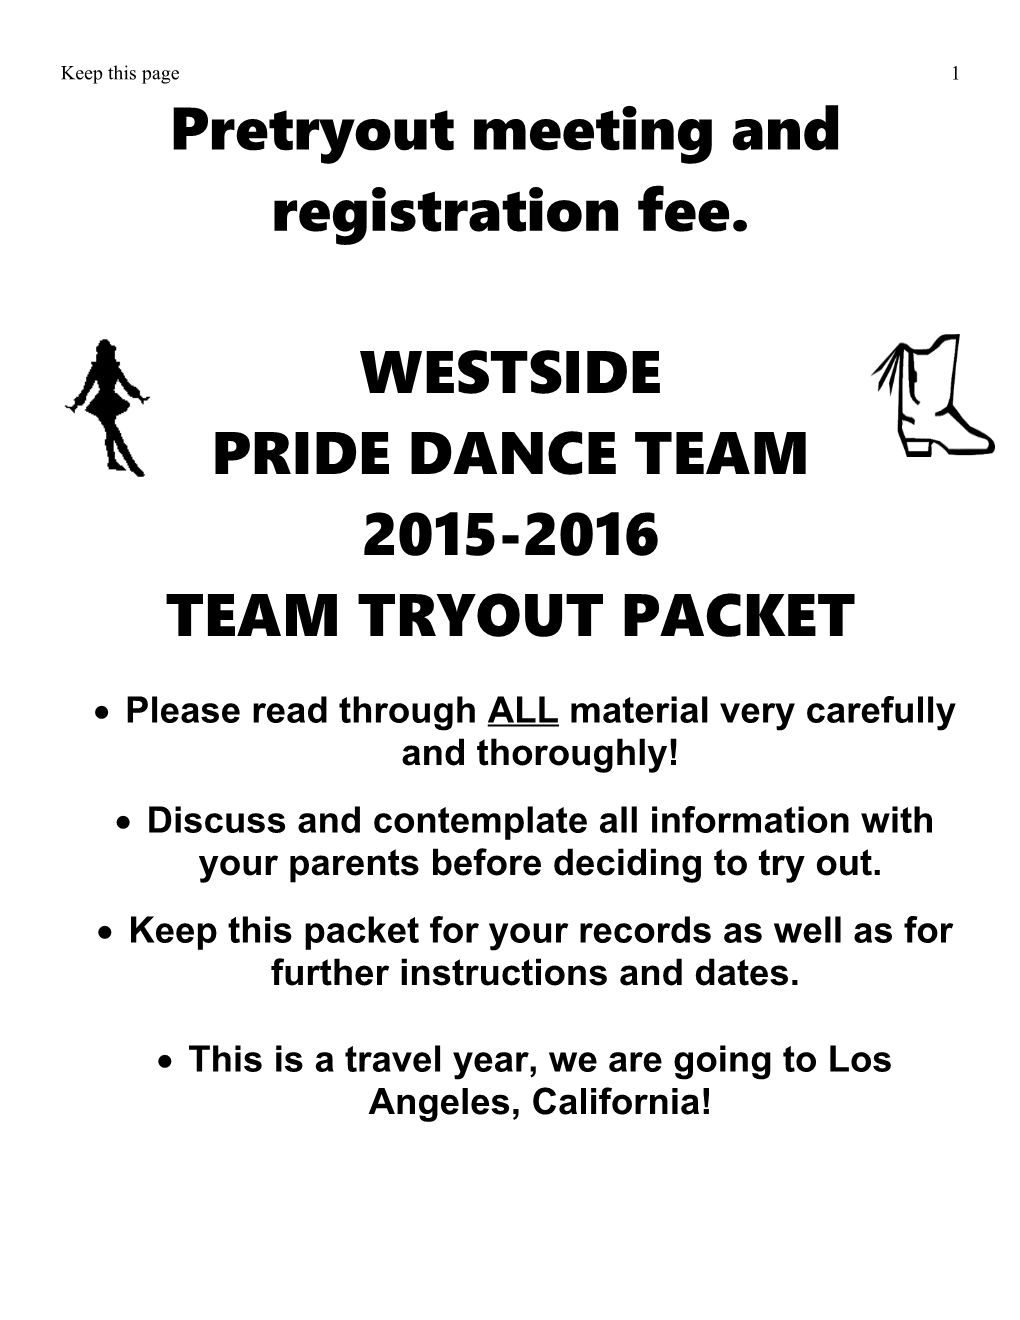 Pride Dance Team Tryout Information and Guidelines